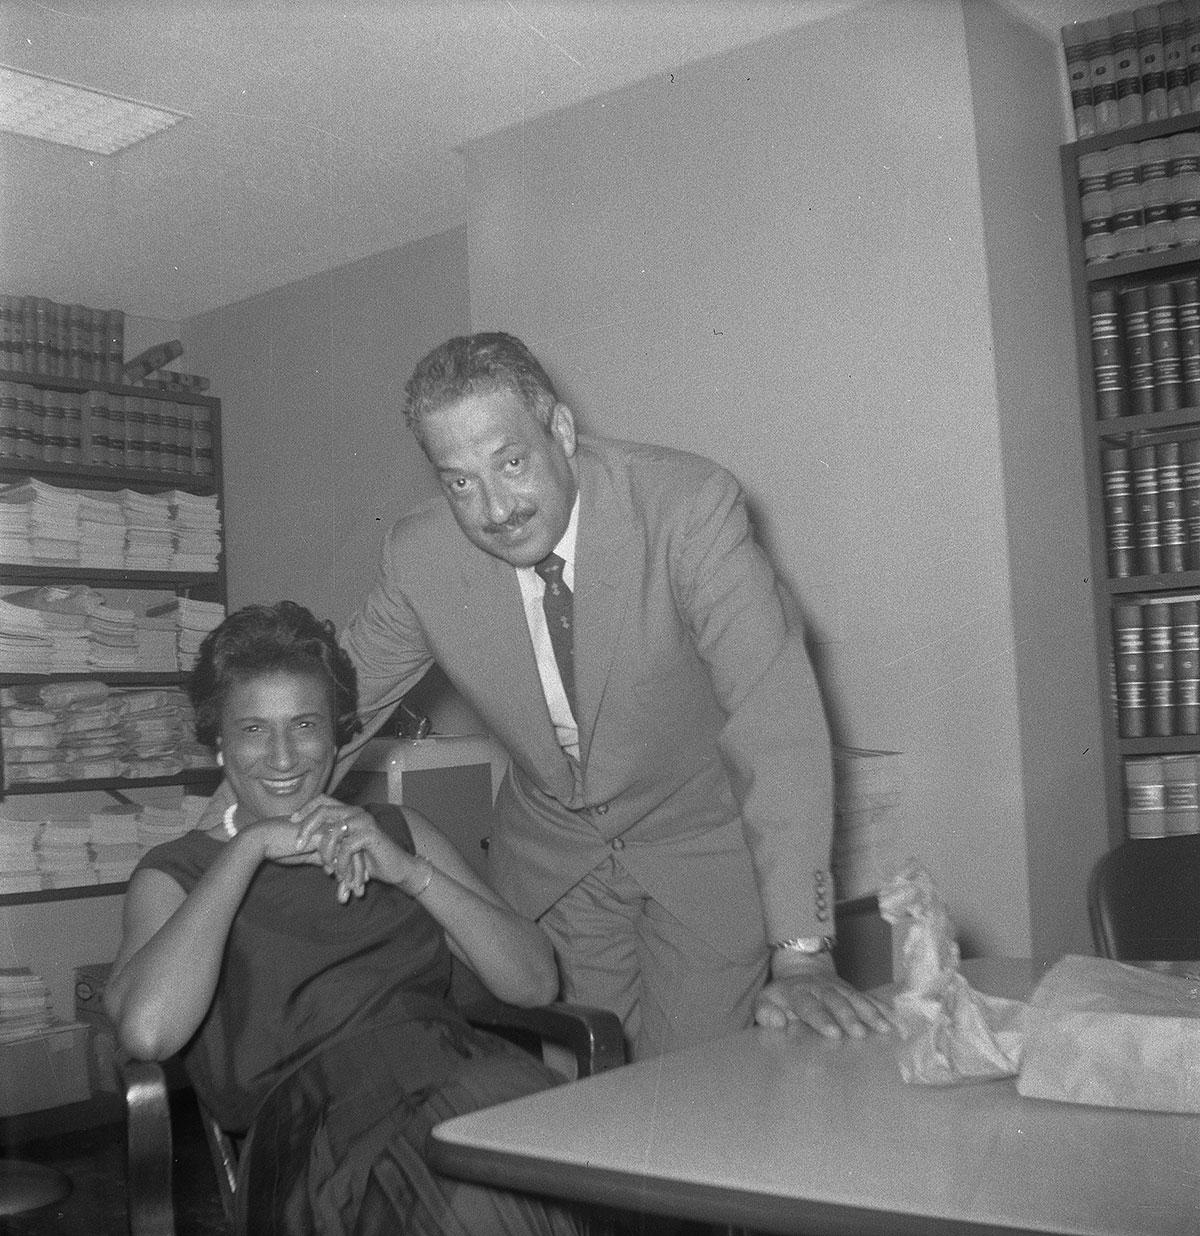 Constance Baker Motley and future Supreme Court justice Thurgood Marshall